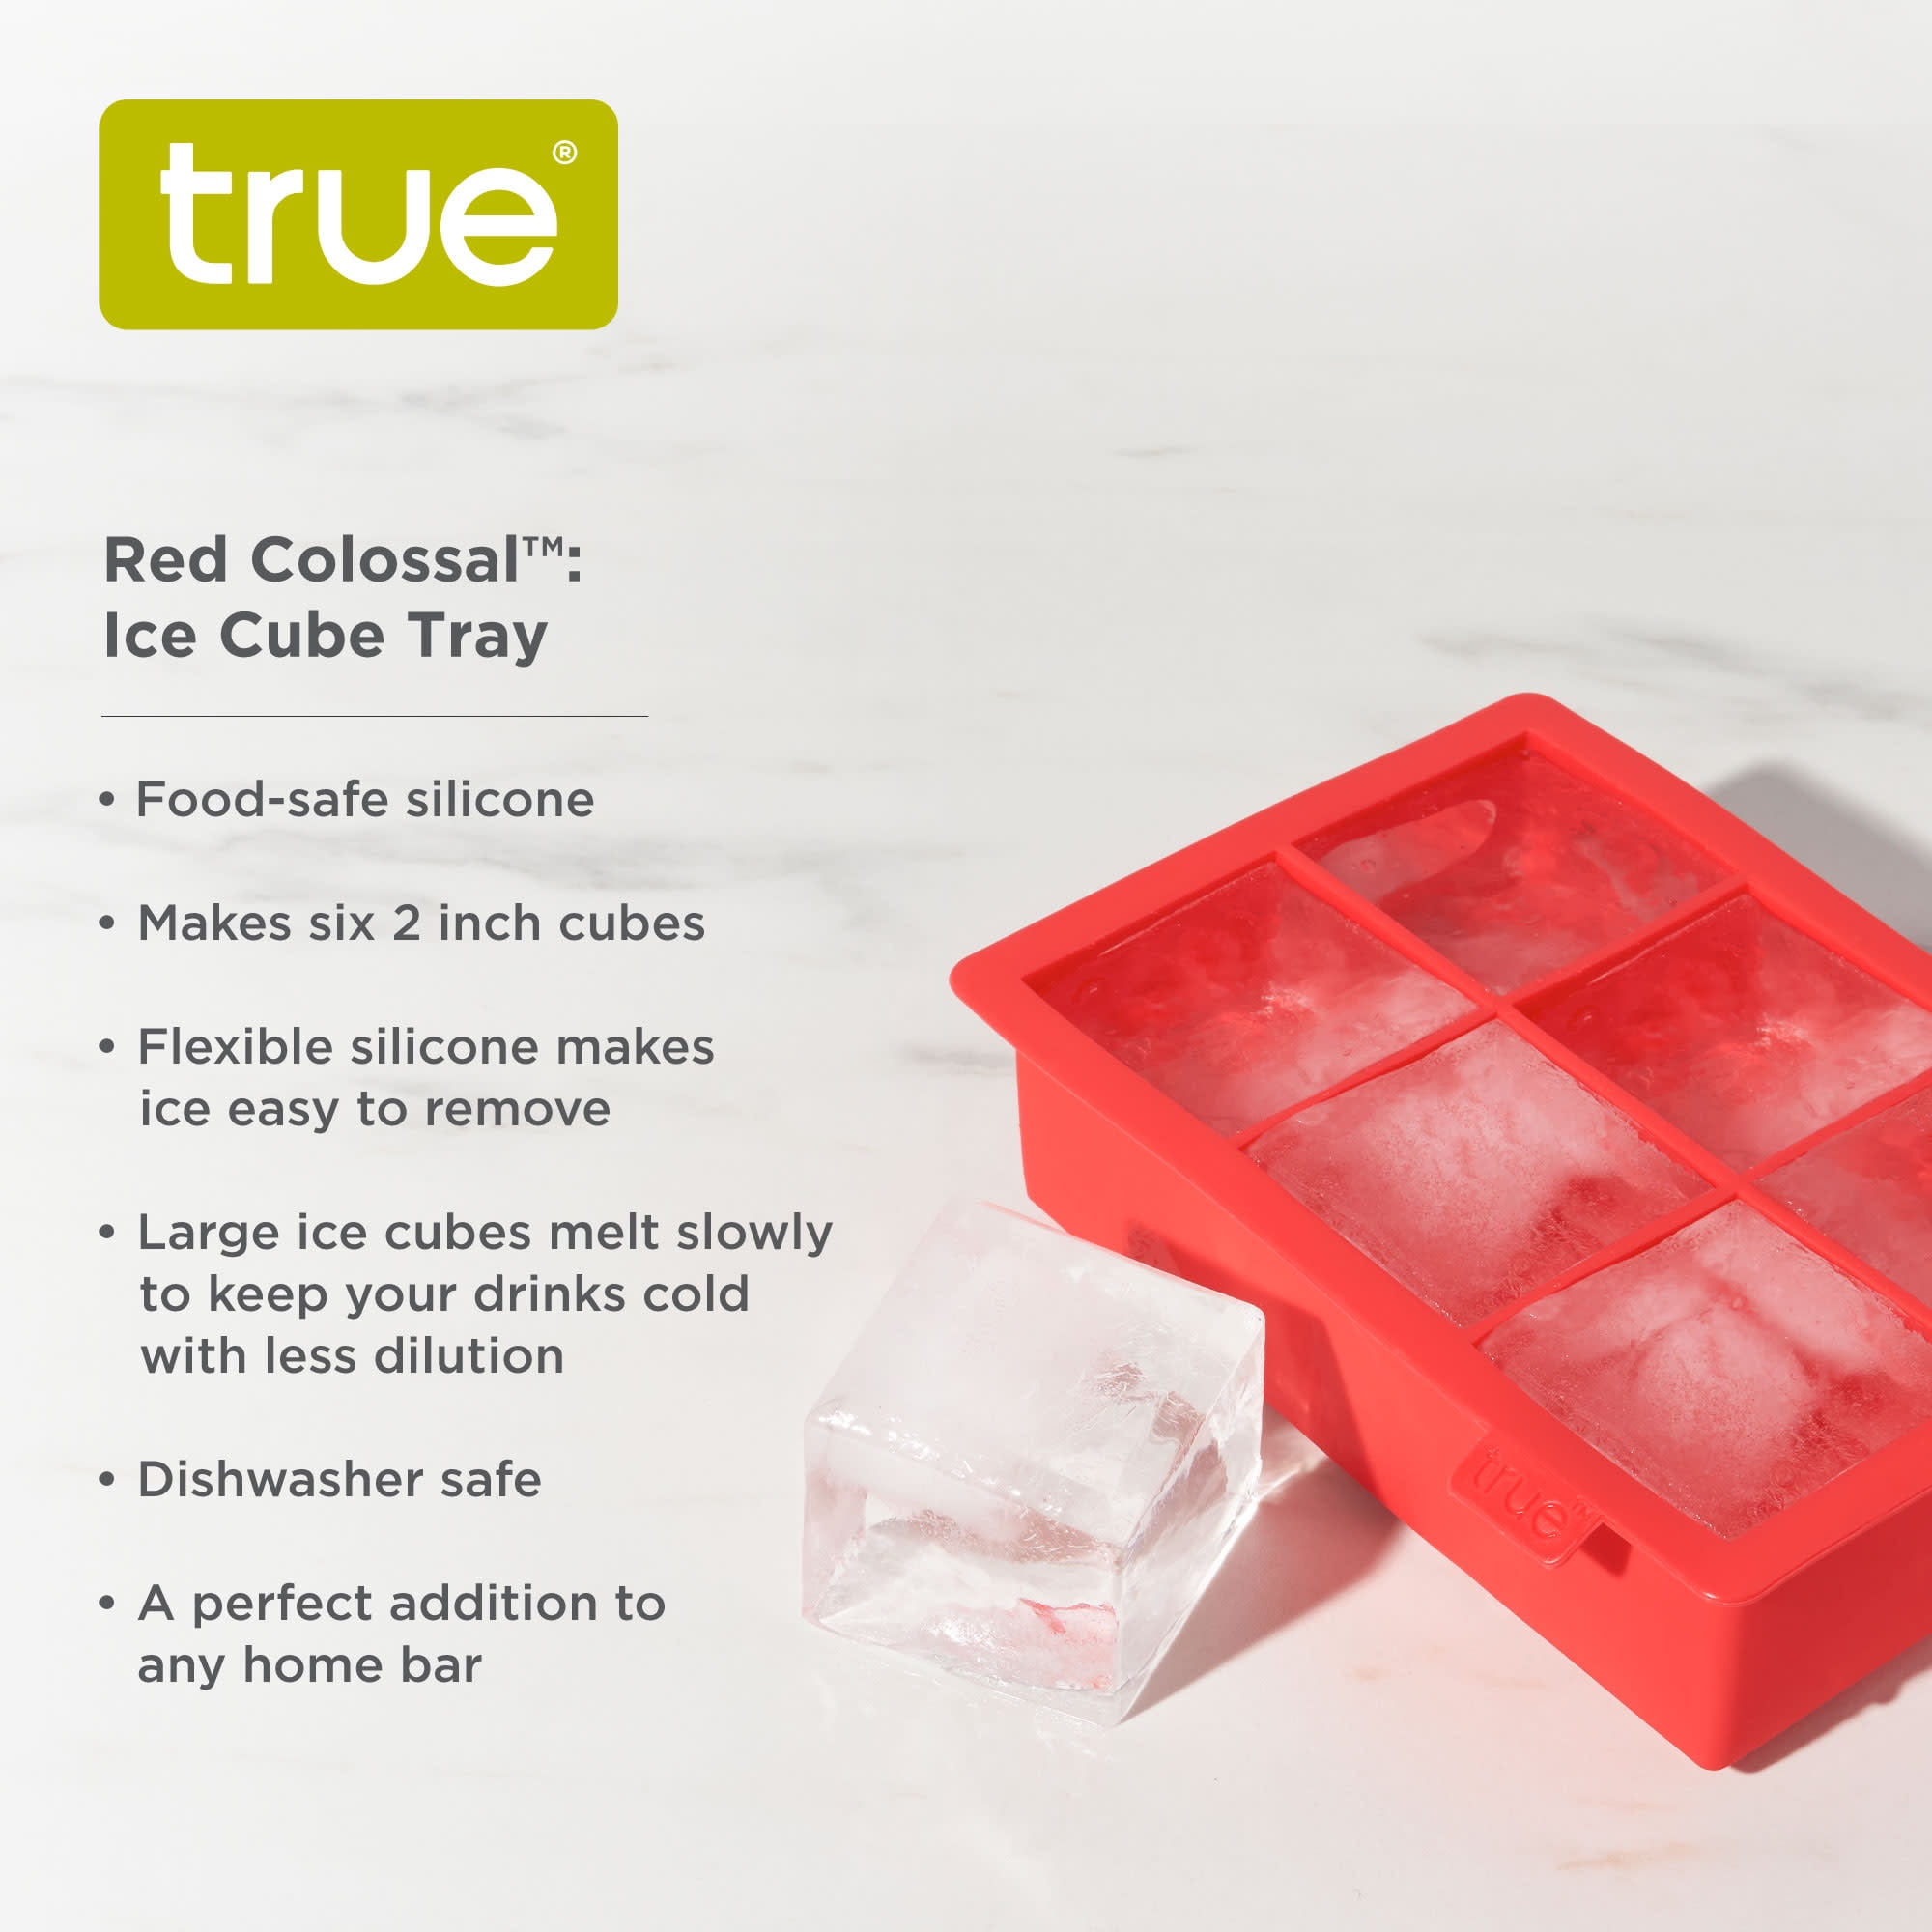 18 Totally Brilliant Ways to Use an Ice Cube Tray - Red and Honey